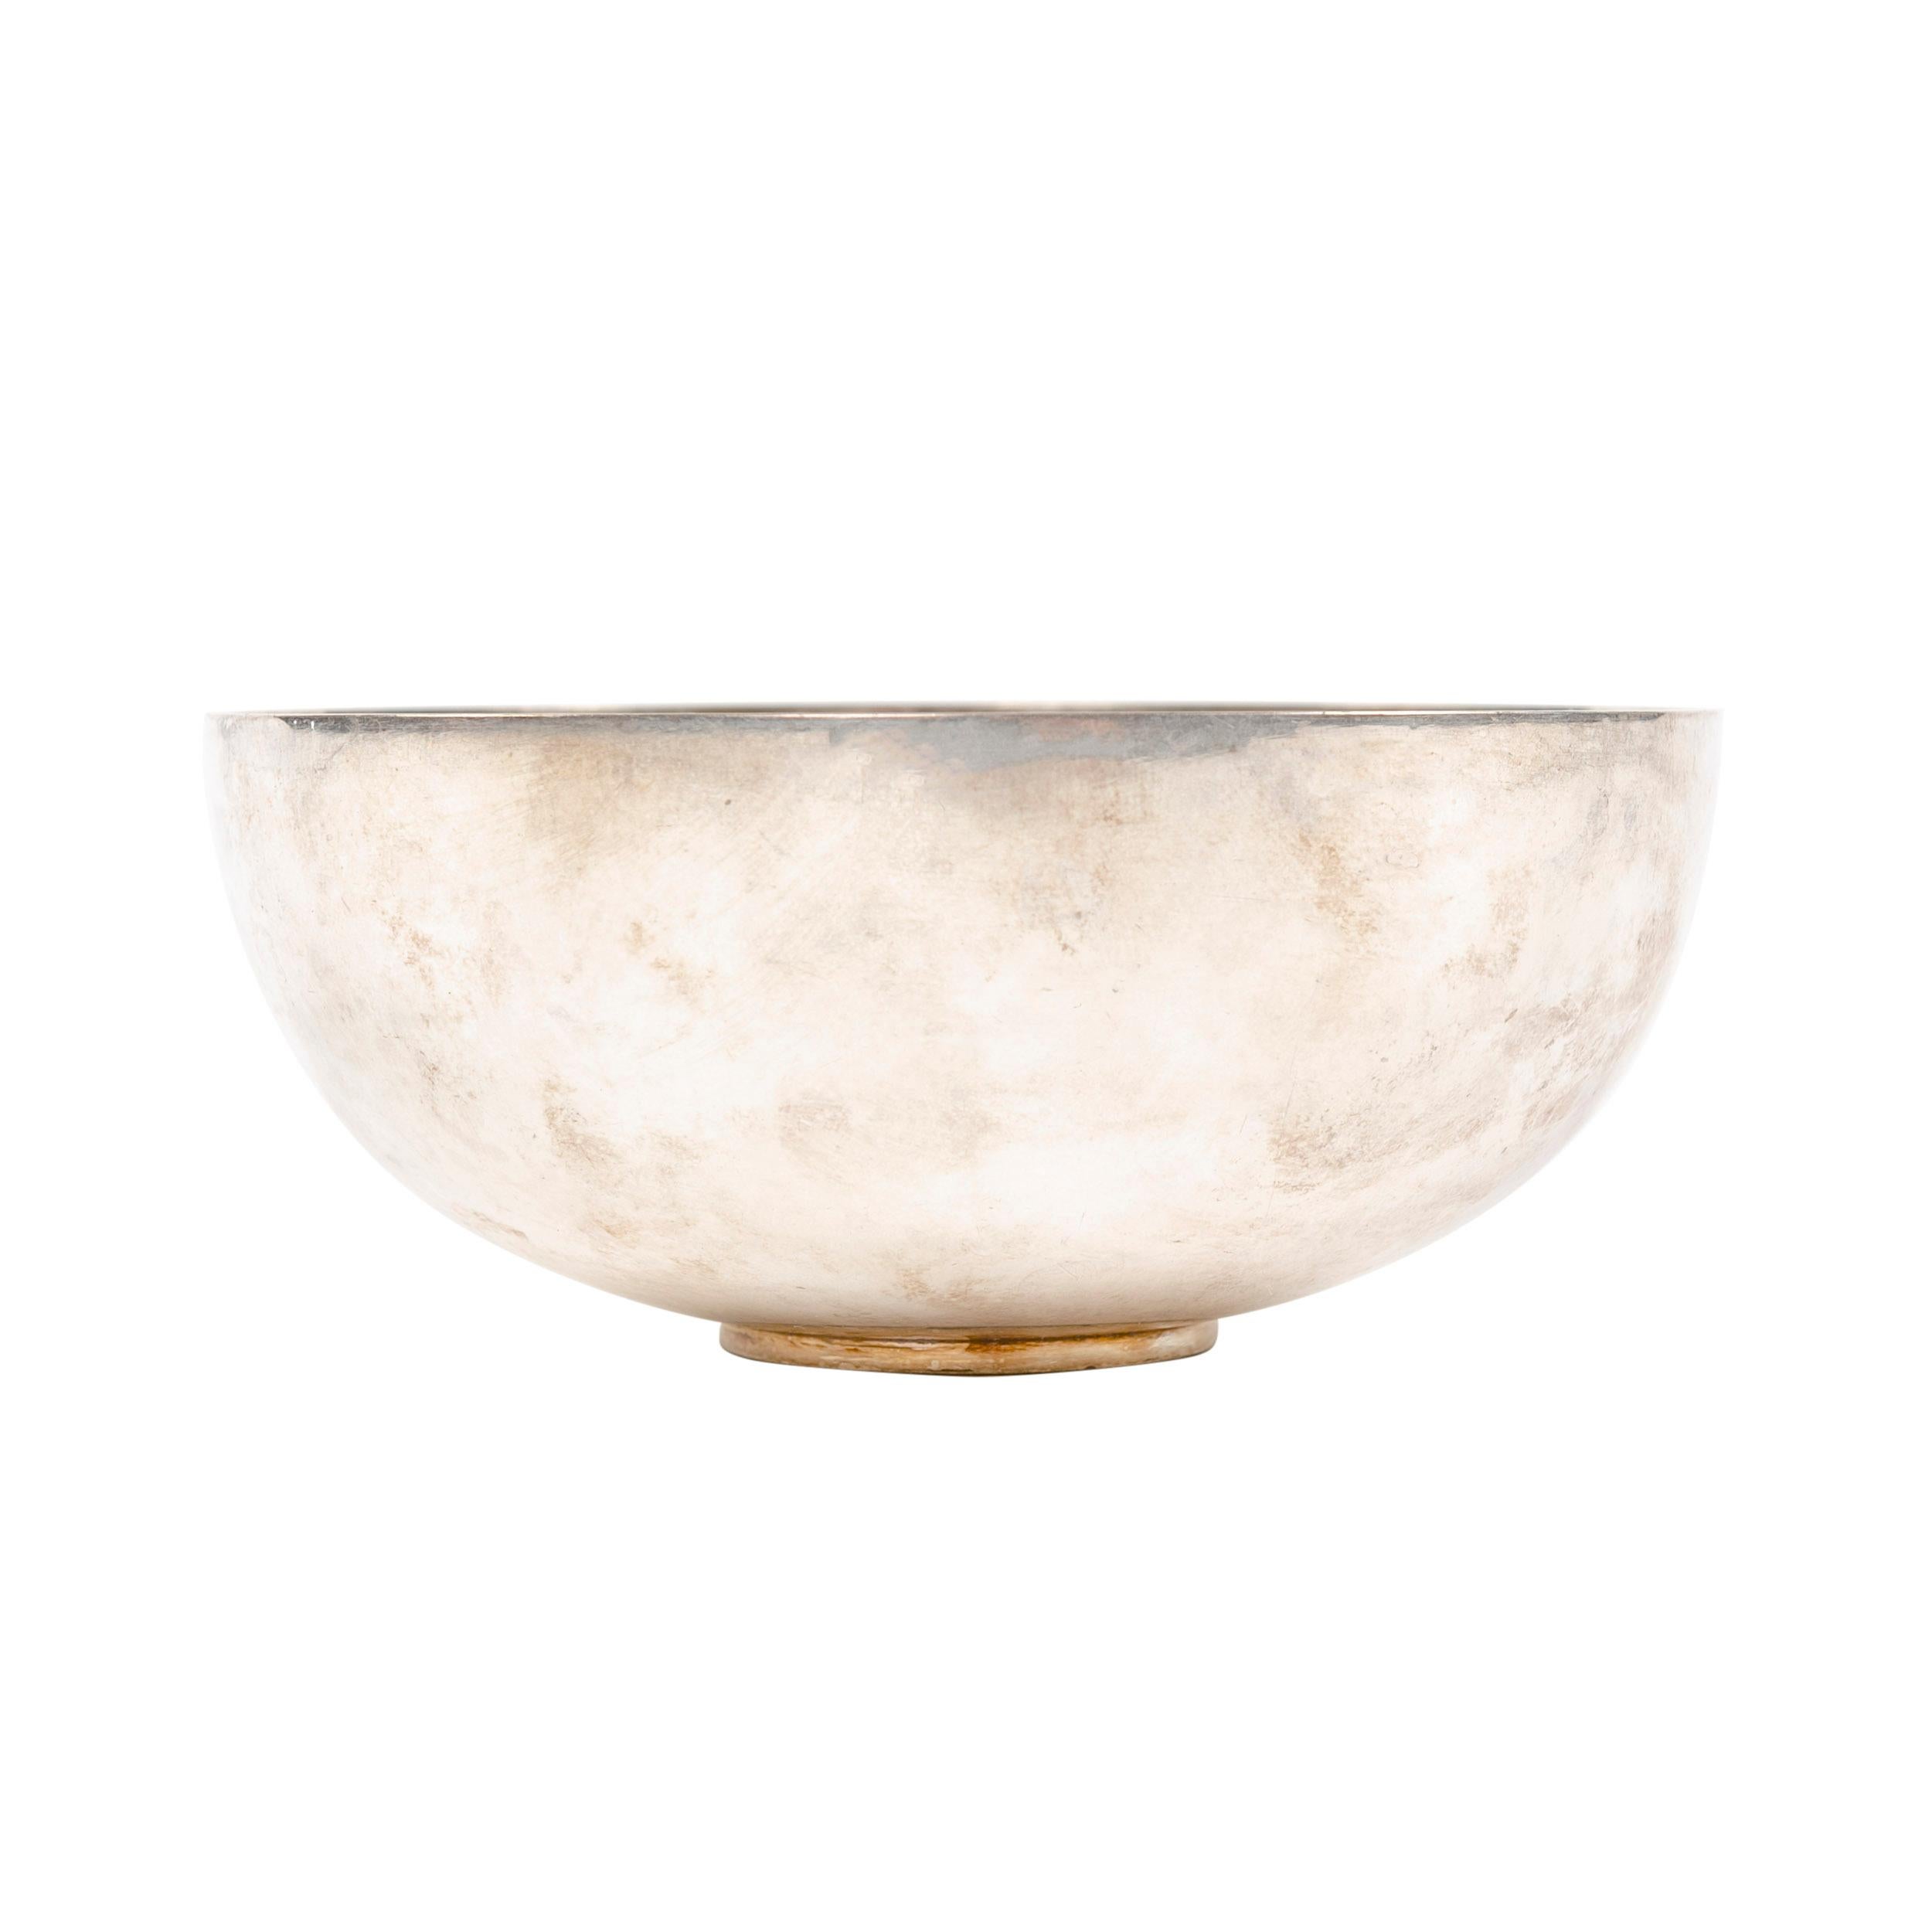 A small Scandinavian Modern sterling silver bowl designed by Piet Hein. Bowl is stamped '1145 B' on its base. Manufactured by Georg Jensen in Denmark, 1960s.